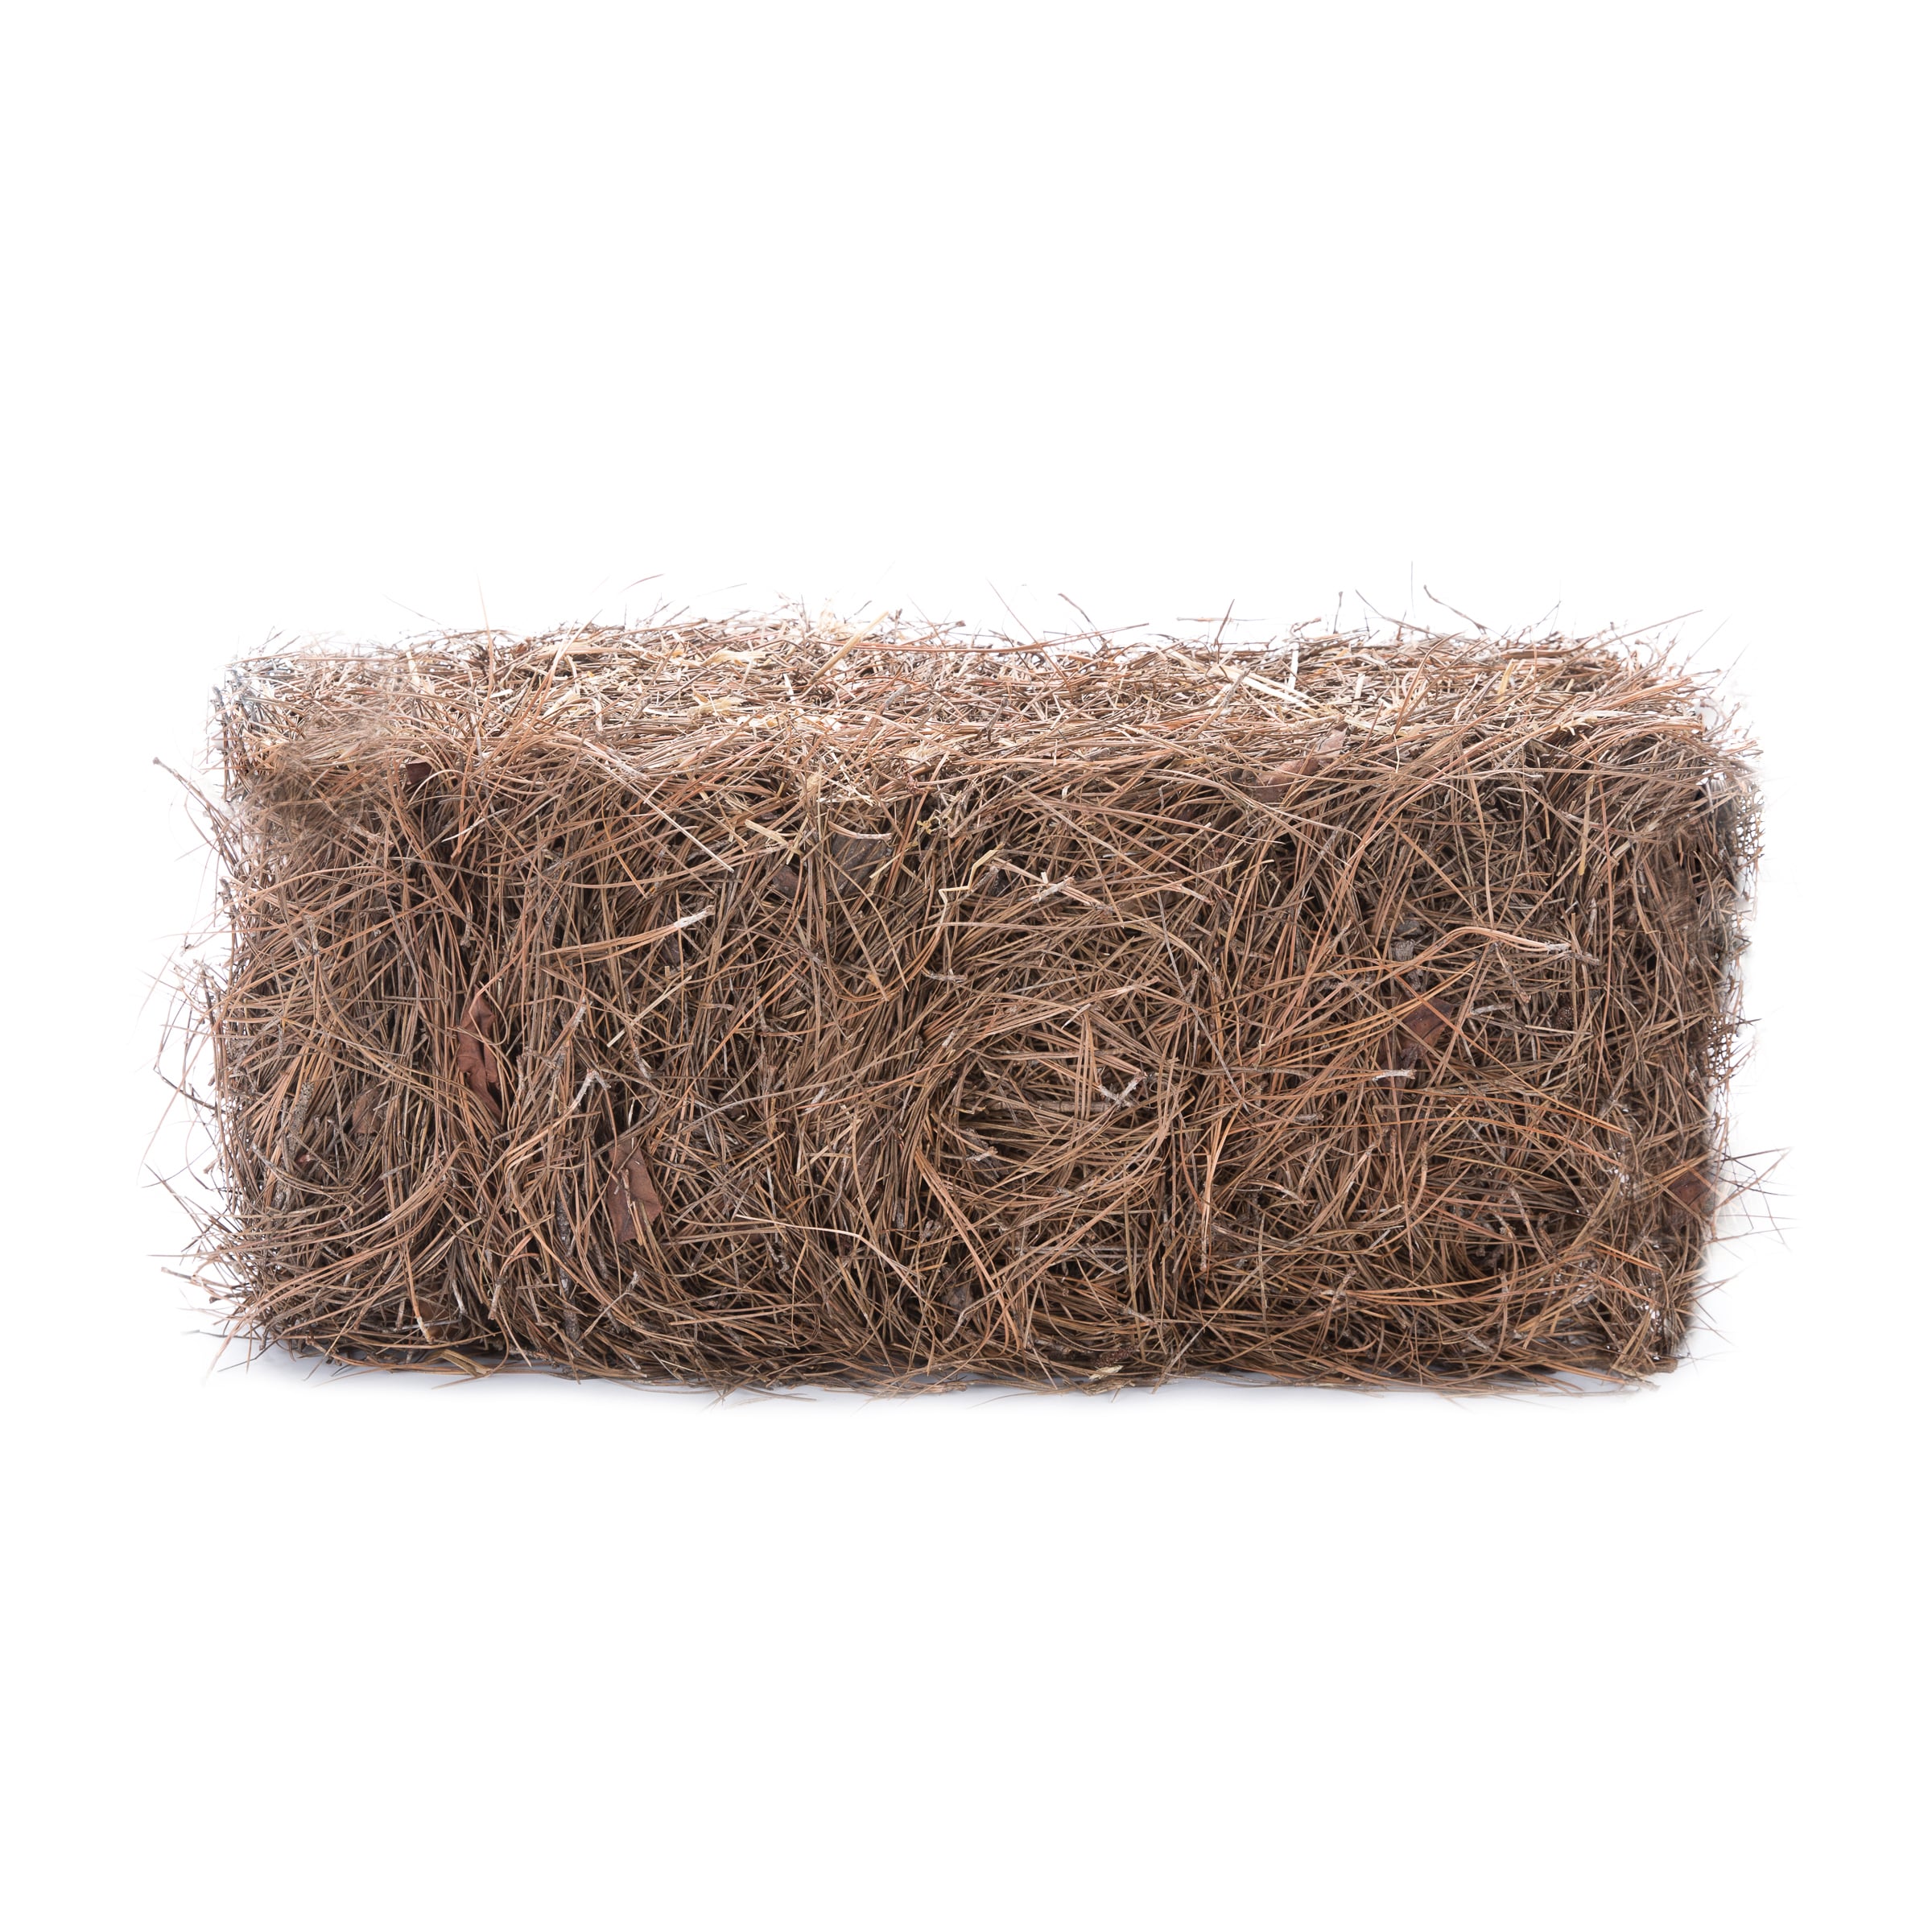 Buy Hay Straw Bales Online In India -  India